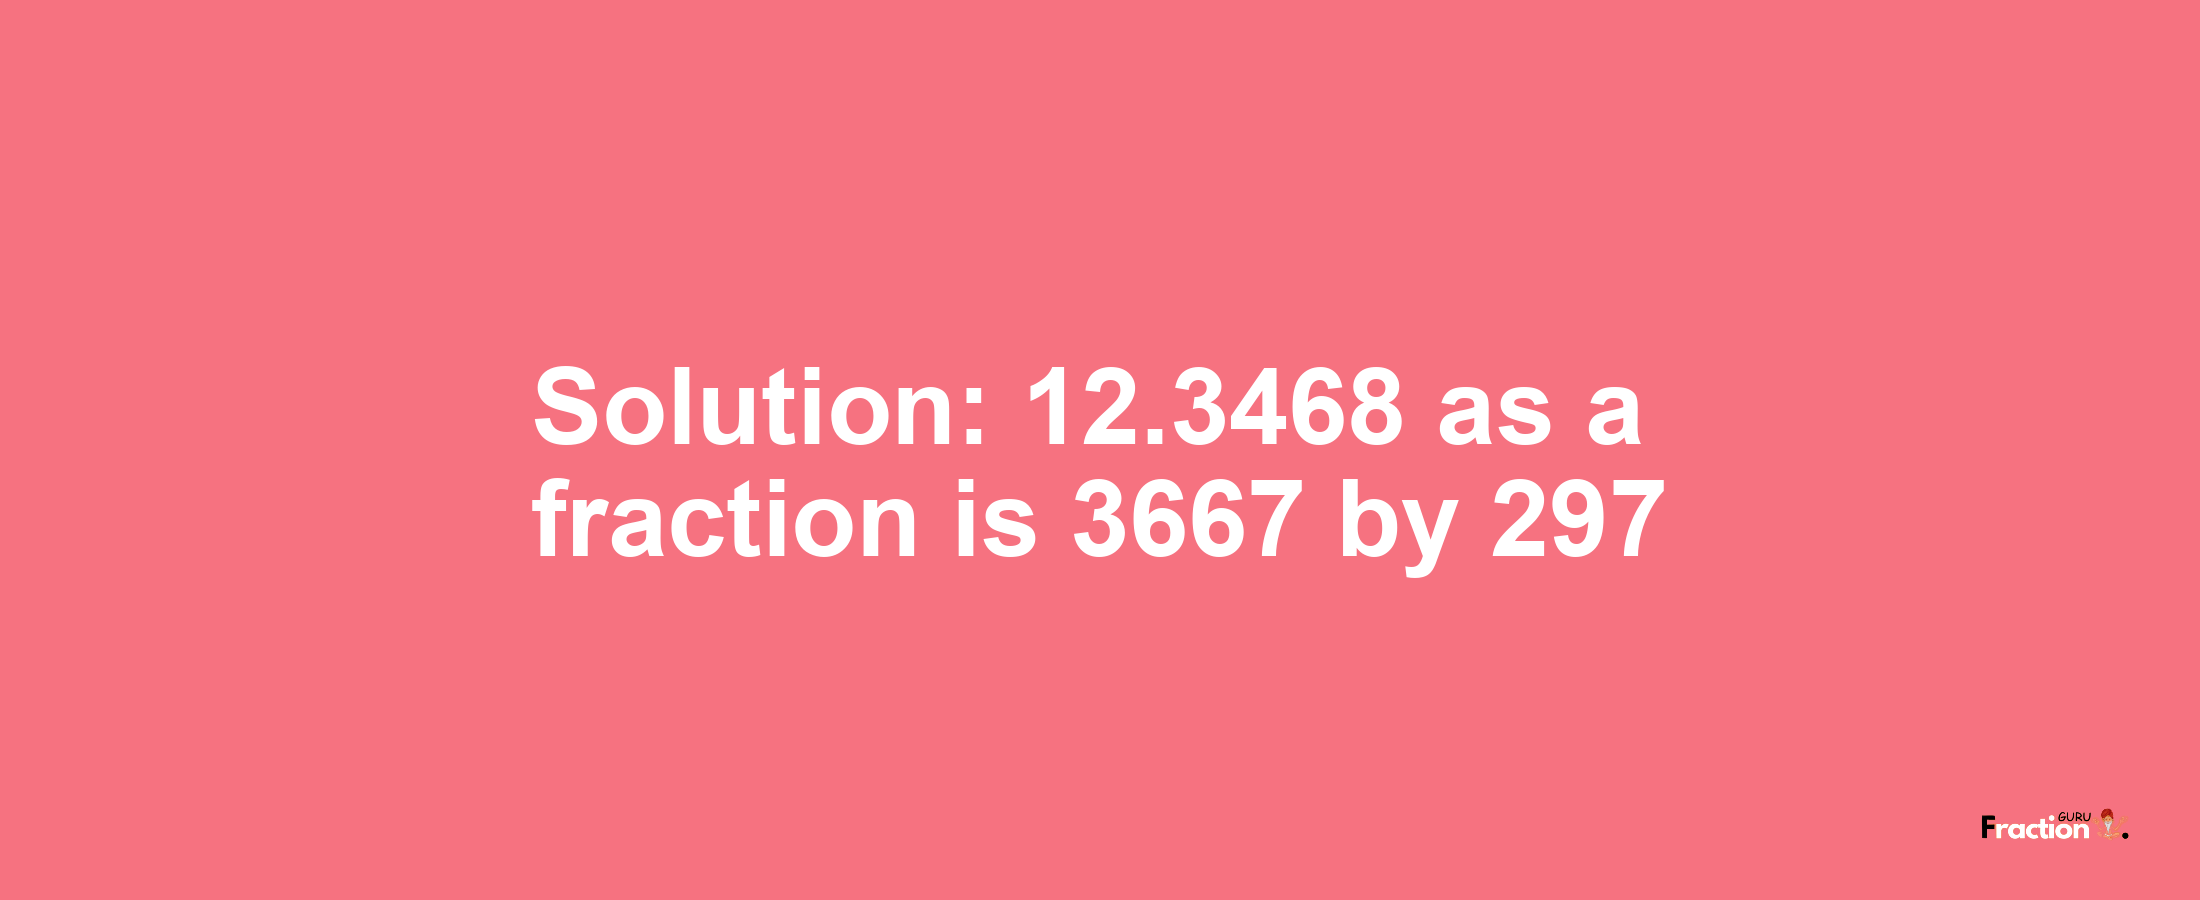 Solution:12.3468 as a fraction is 3667/297